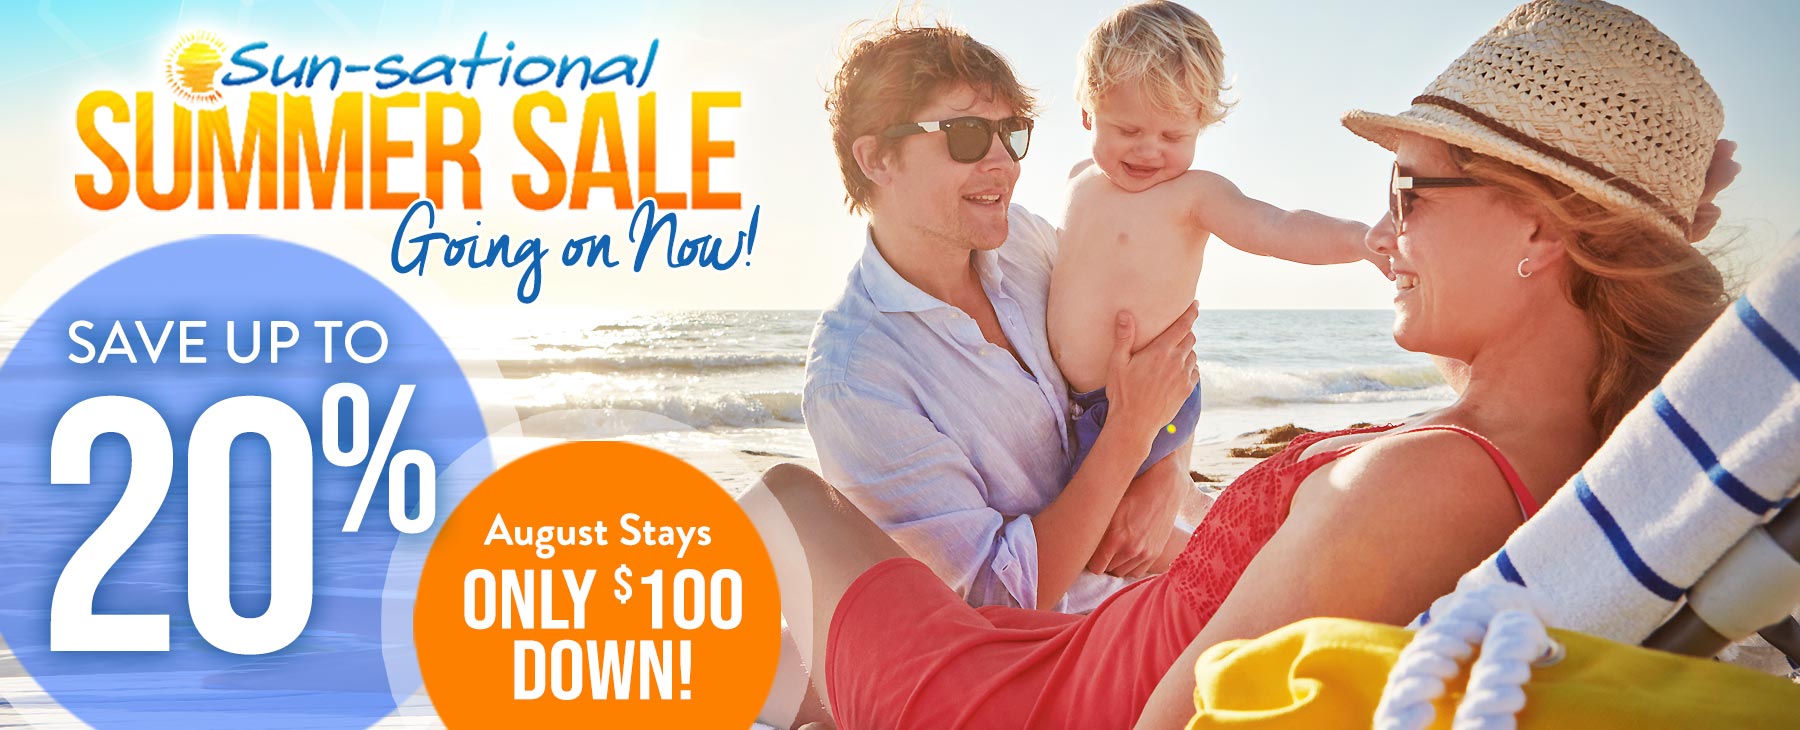 Sun-Sational Summer Sale Going on Now!